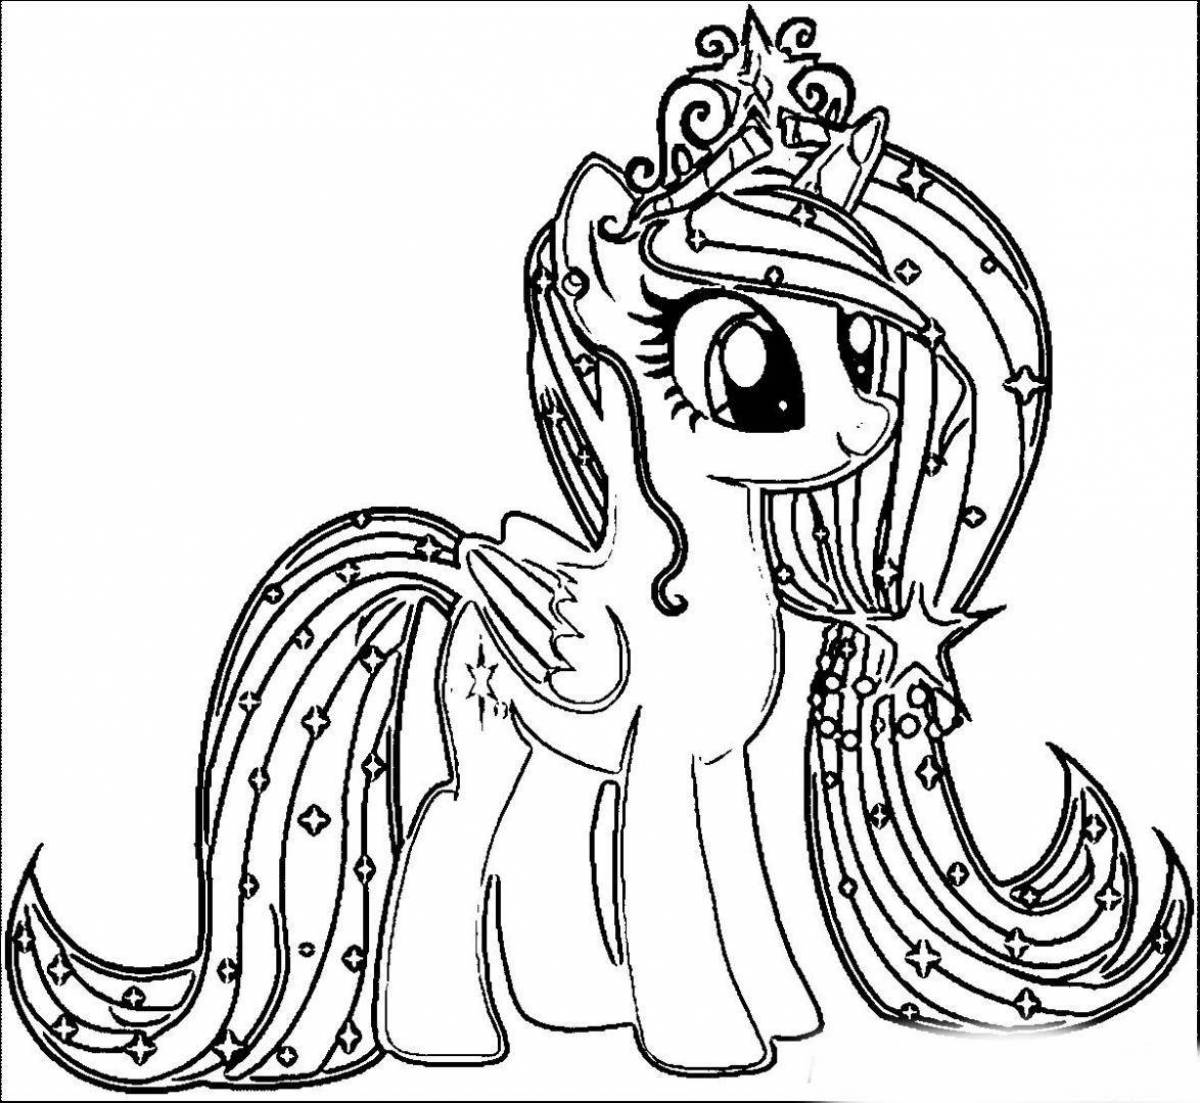 Coloring page cheerful pony malito